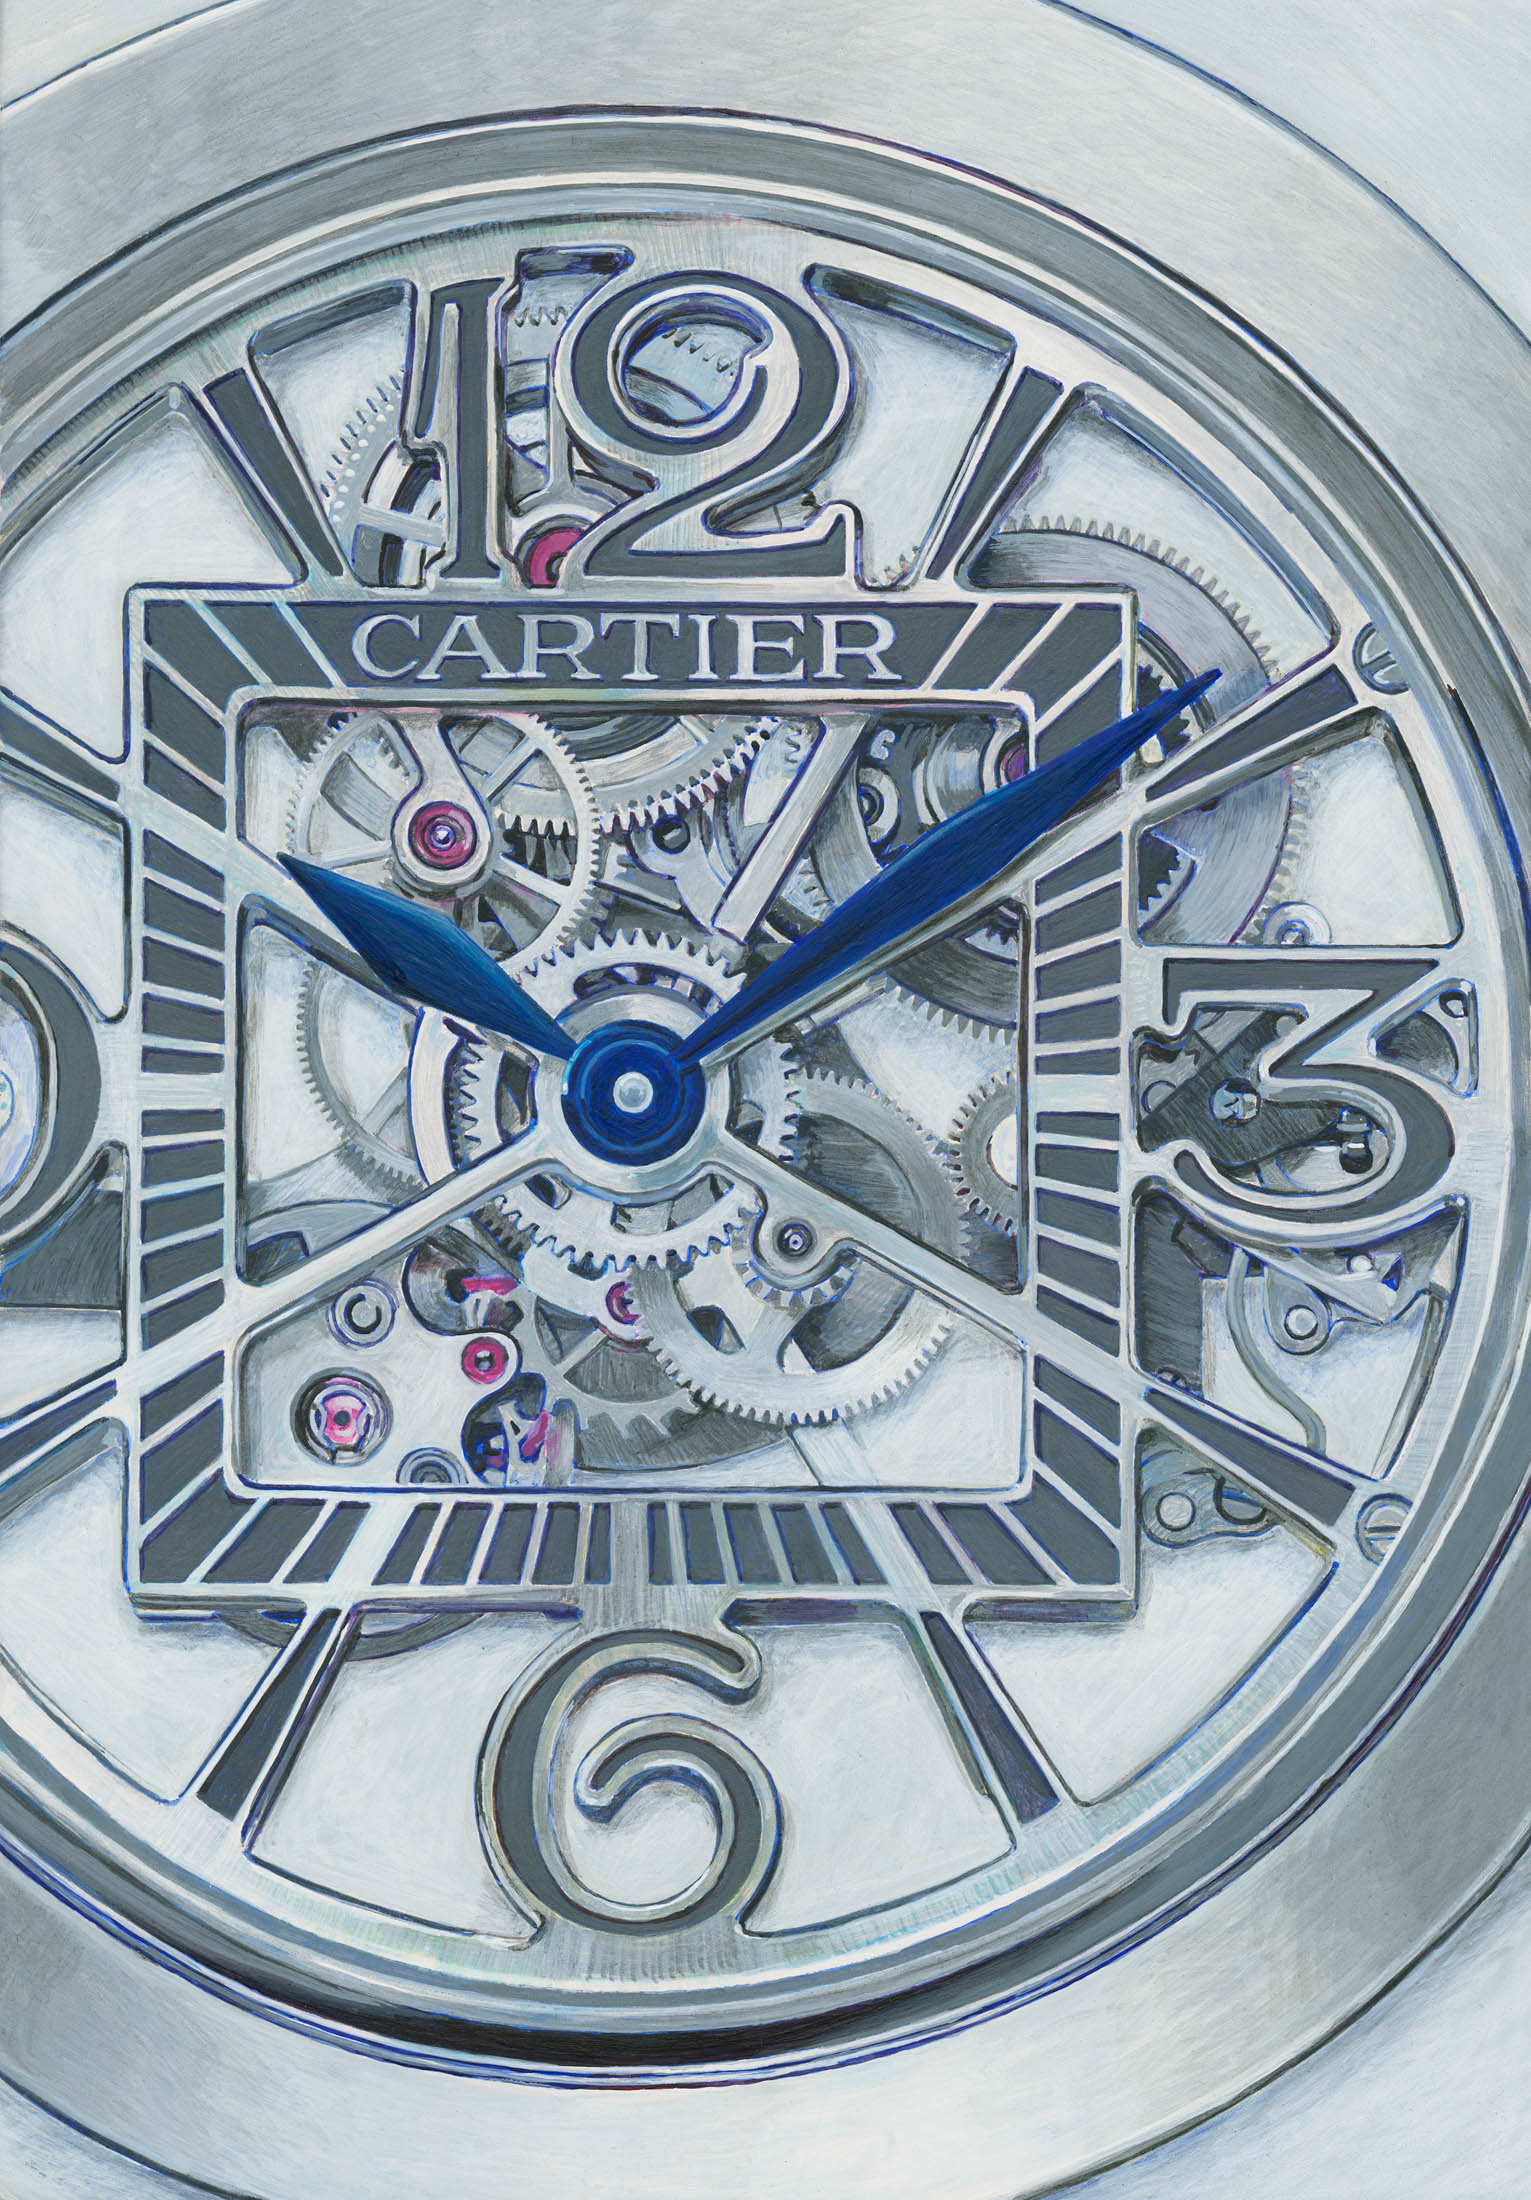 cartier in new jersey